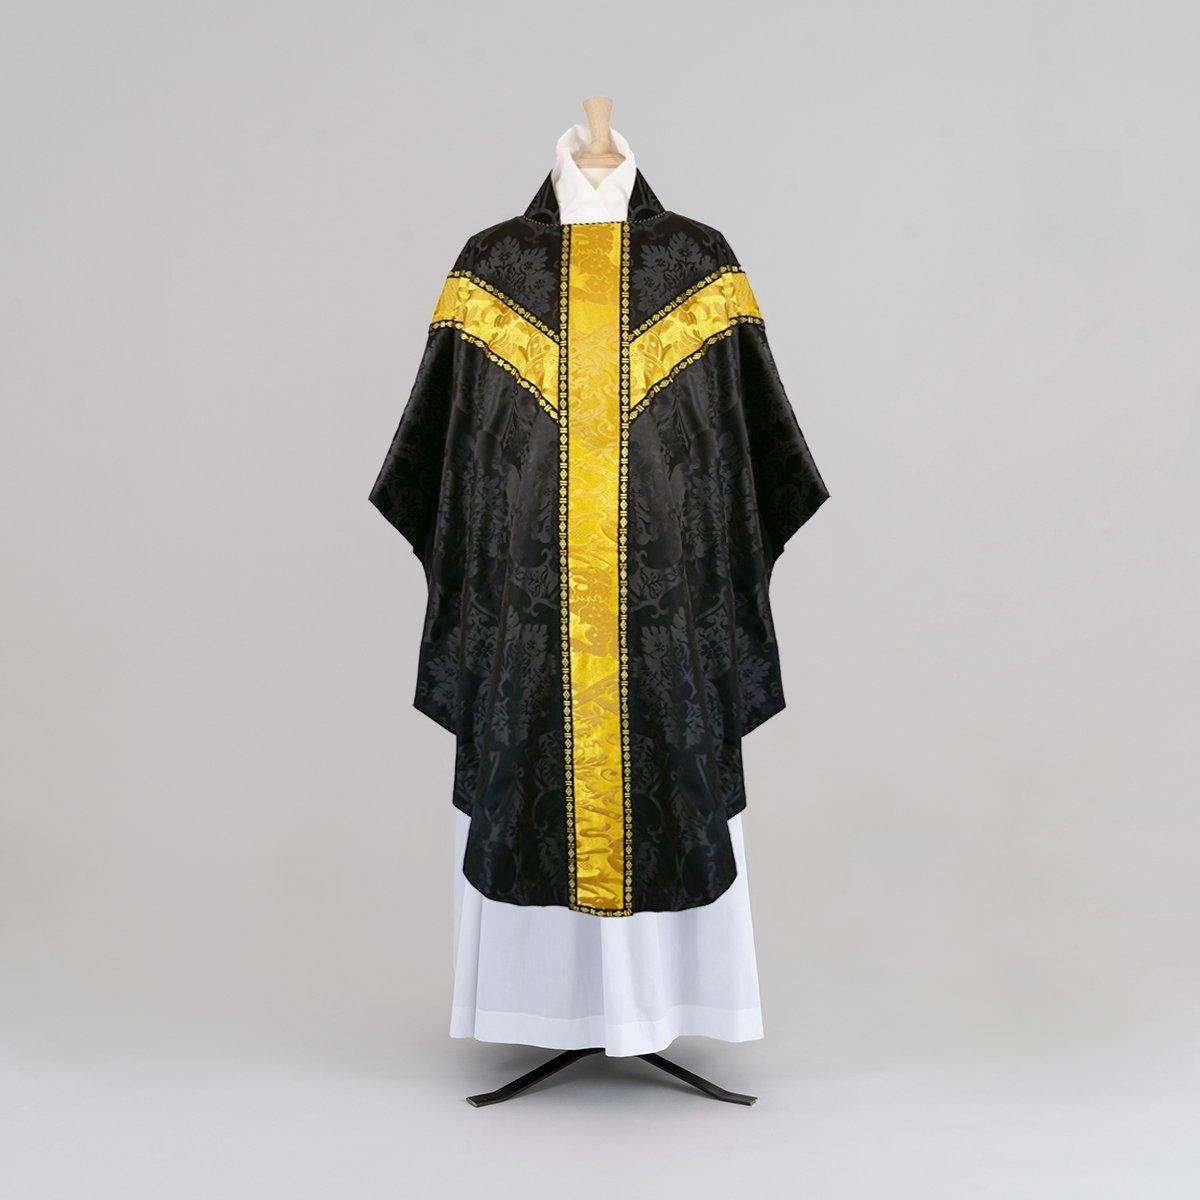 Full Gothic Chasuble & Stole in Black 'Gothic' with Venetian Gold 'Canneregio' Orphreys - Watts & Co.